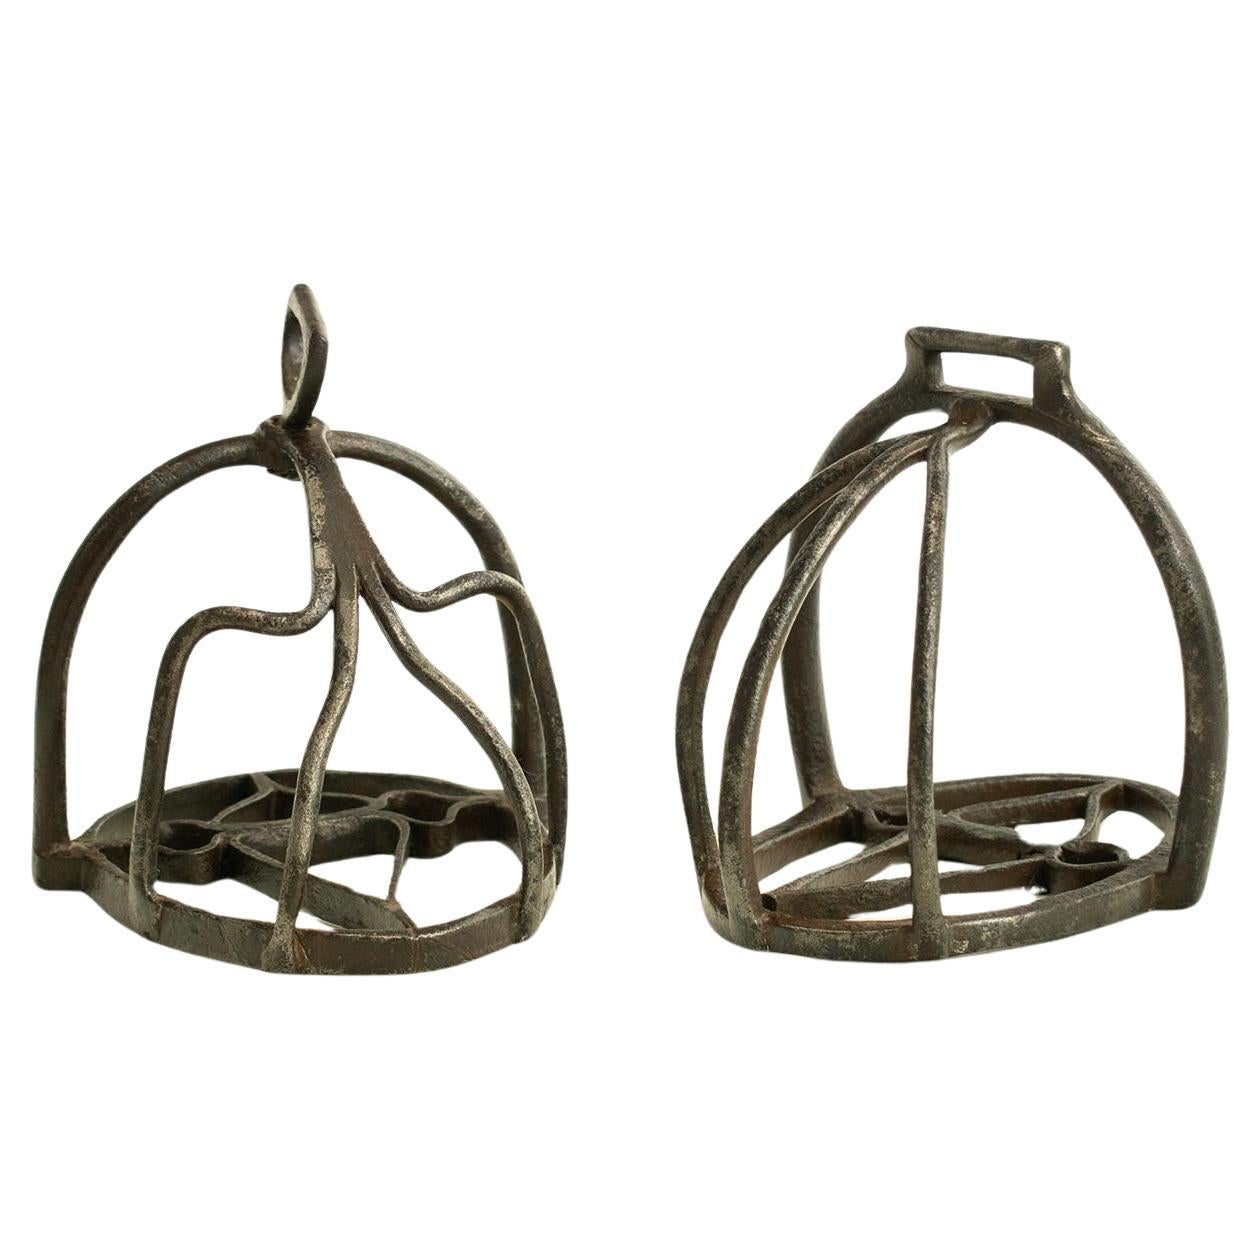 Composed pair of original mid 17th/early 18th century Cavalry basket Stirrups